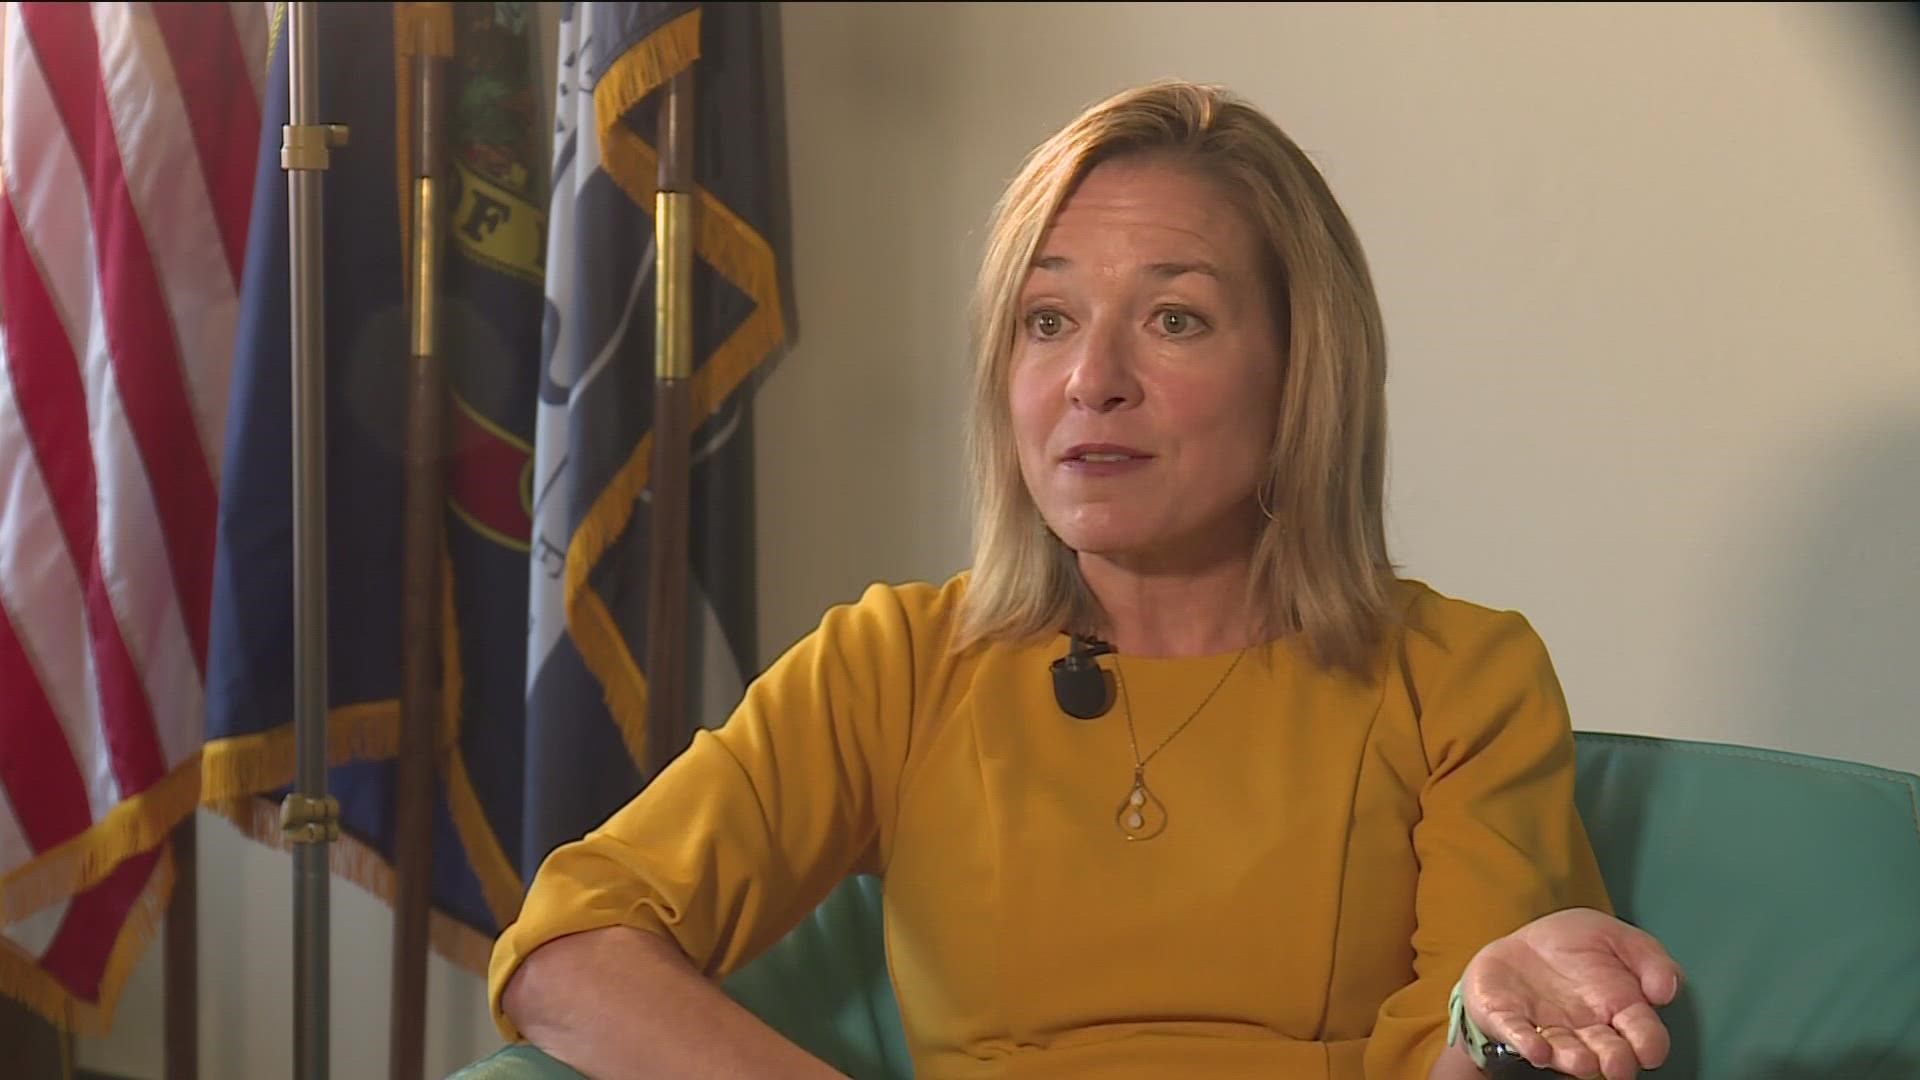 McLean said she was in the midst of trying to address management style when the KTVB report was published. Then, the union asked for a meeting.